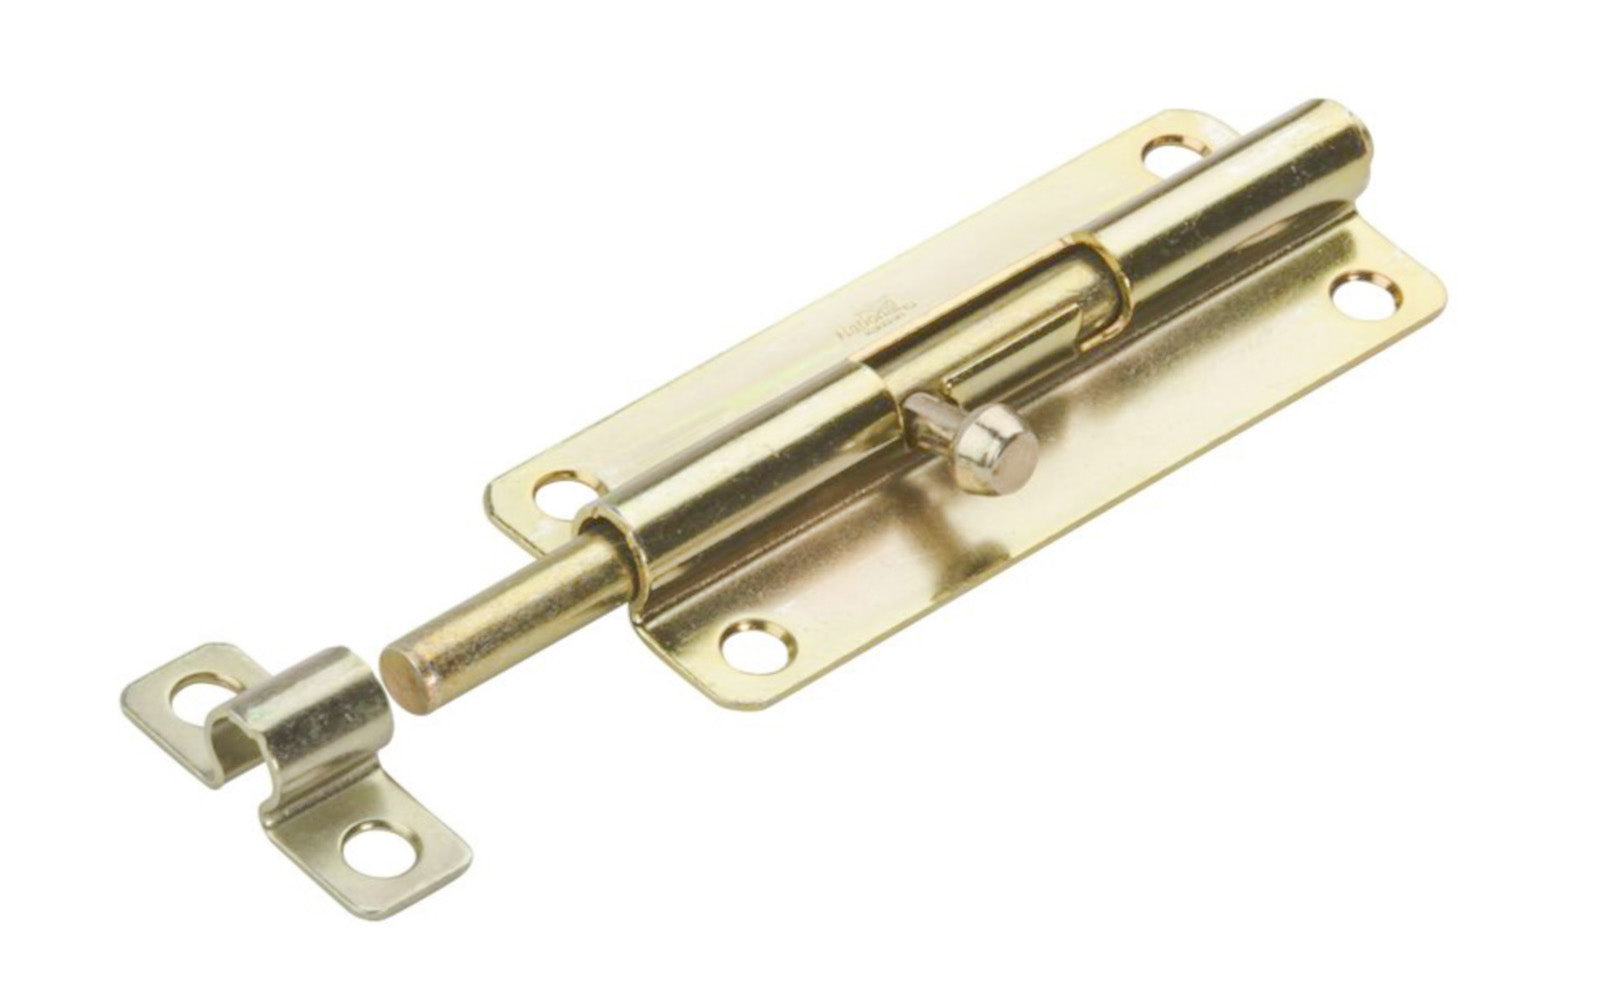 This 5" Brass-Plated Finish Barrel Bolt is designed for security applications on lightweight doors, chests, & cabinets. Use on vertical, horizontal, left or right hand applications. Includes six satin brass phillips screws. 5" width x 1-1/2" height. National Hardware Model No. N151-761. 038613151765